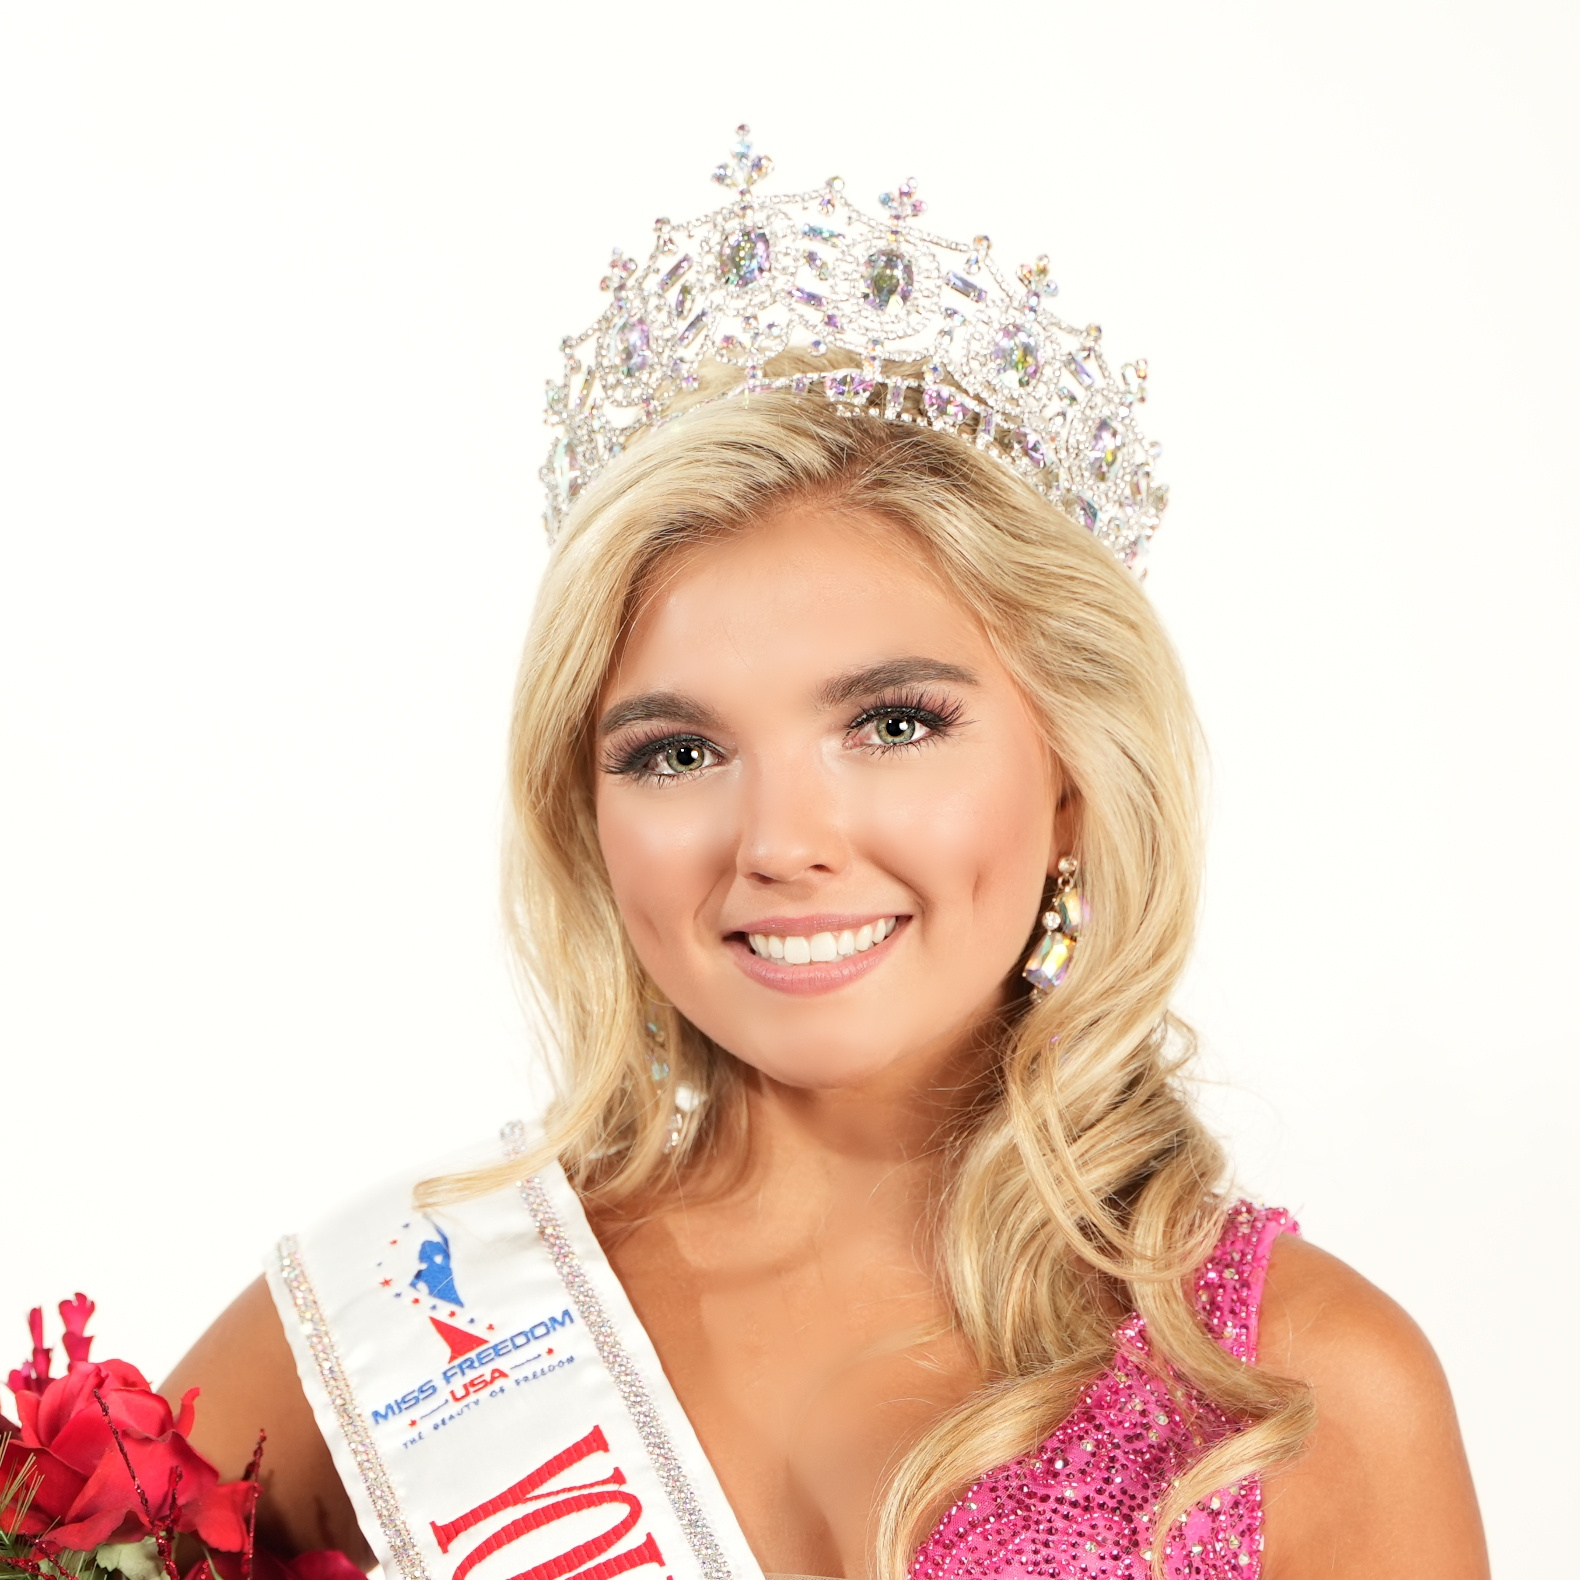 Young Miss Freedom USA